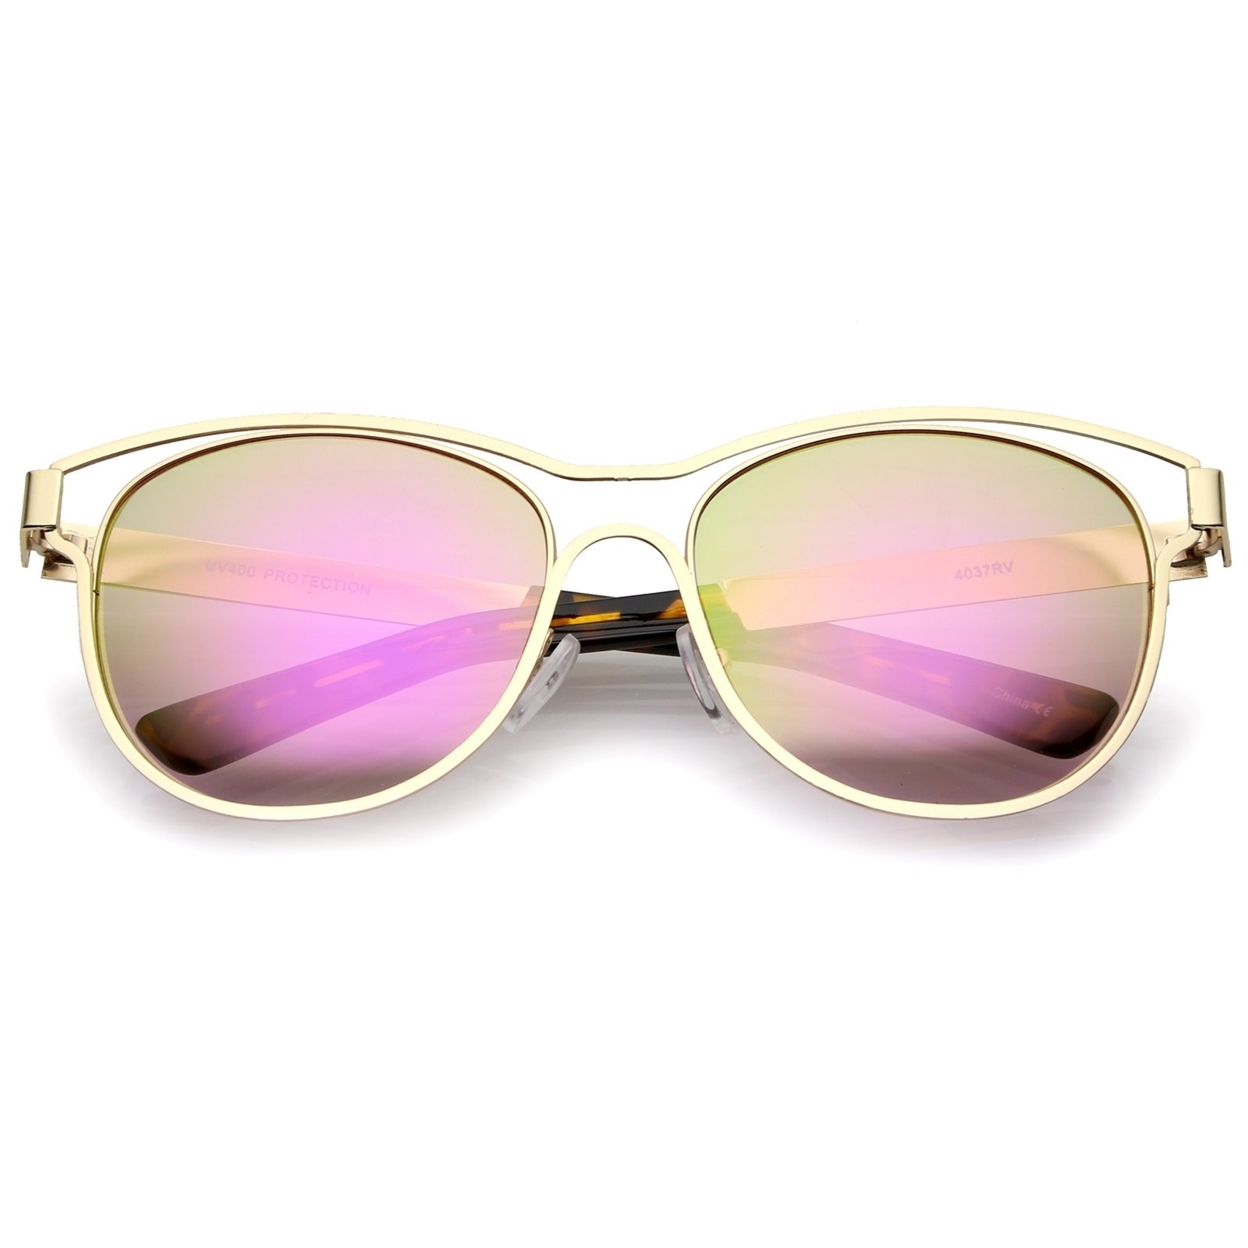 Modern Open Metal Colored Mirror Lens Horn Rimmed Sunglasses 56mm - Gold / Gold Mirror